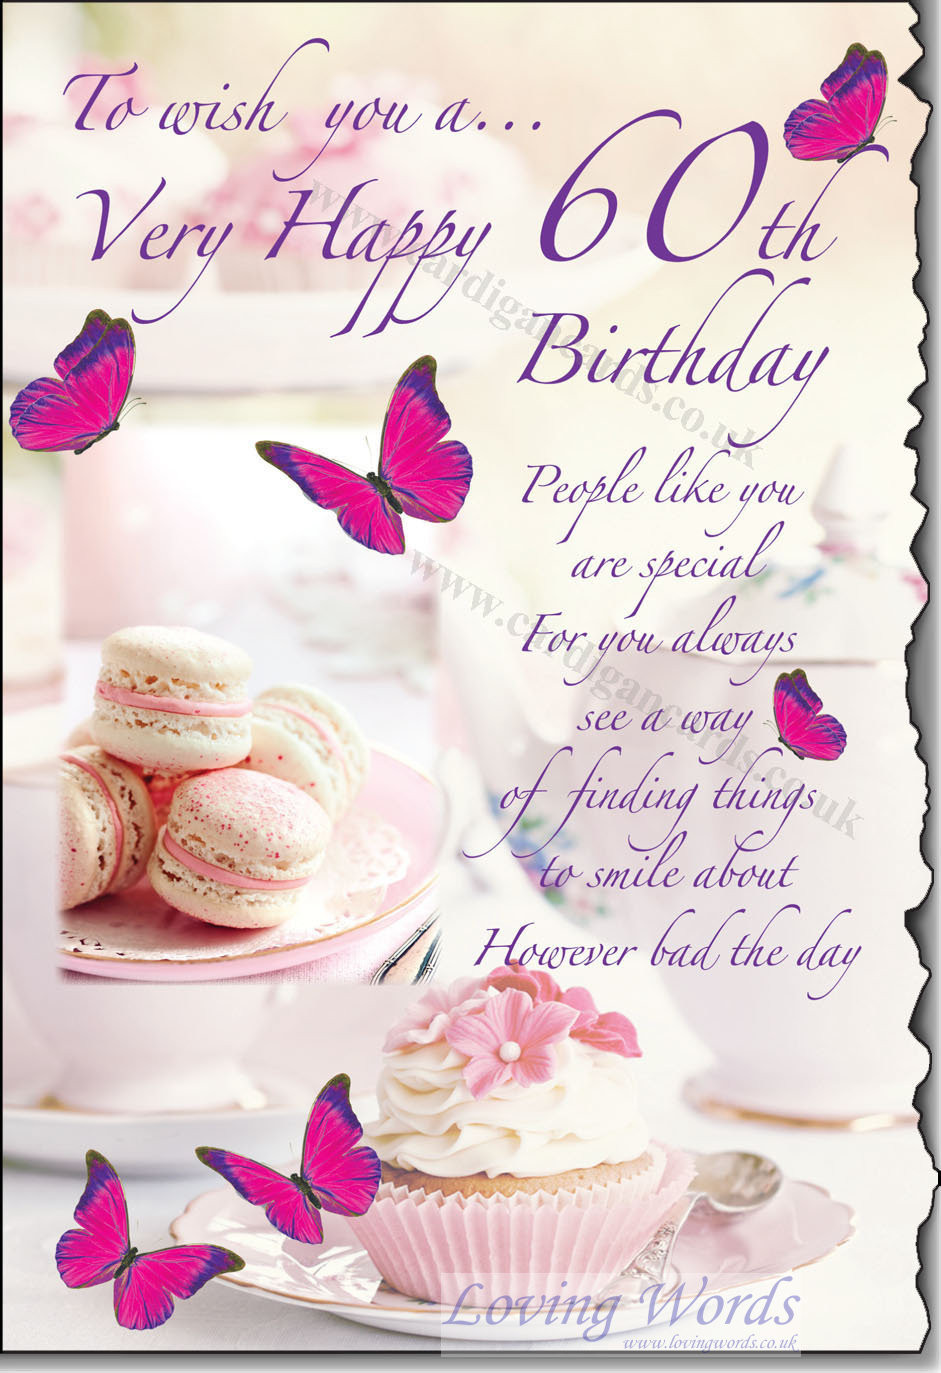 Quotes For 60Th Birthday Female
 Very Happy 60th Birthday